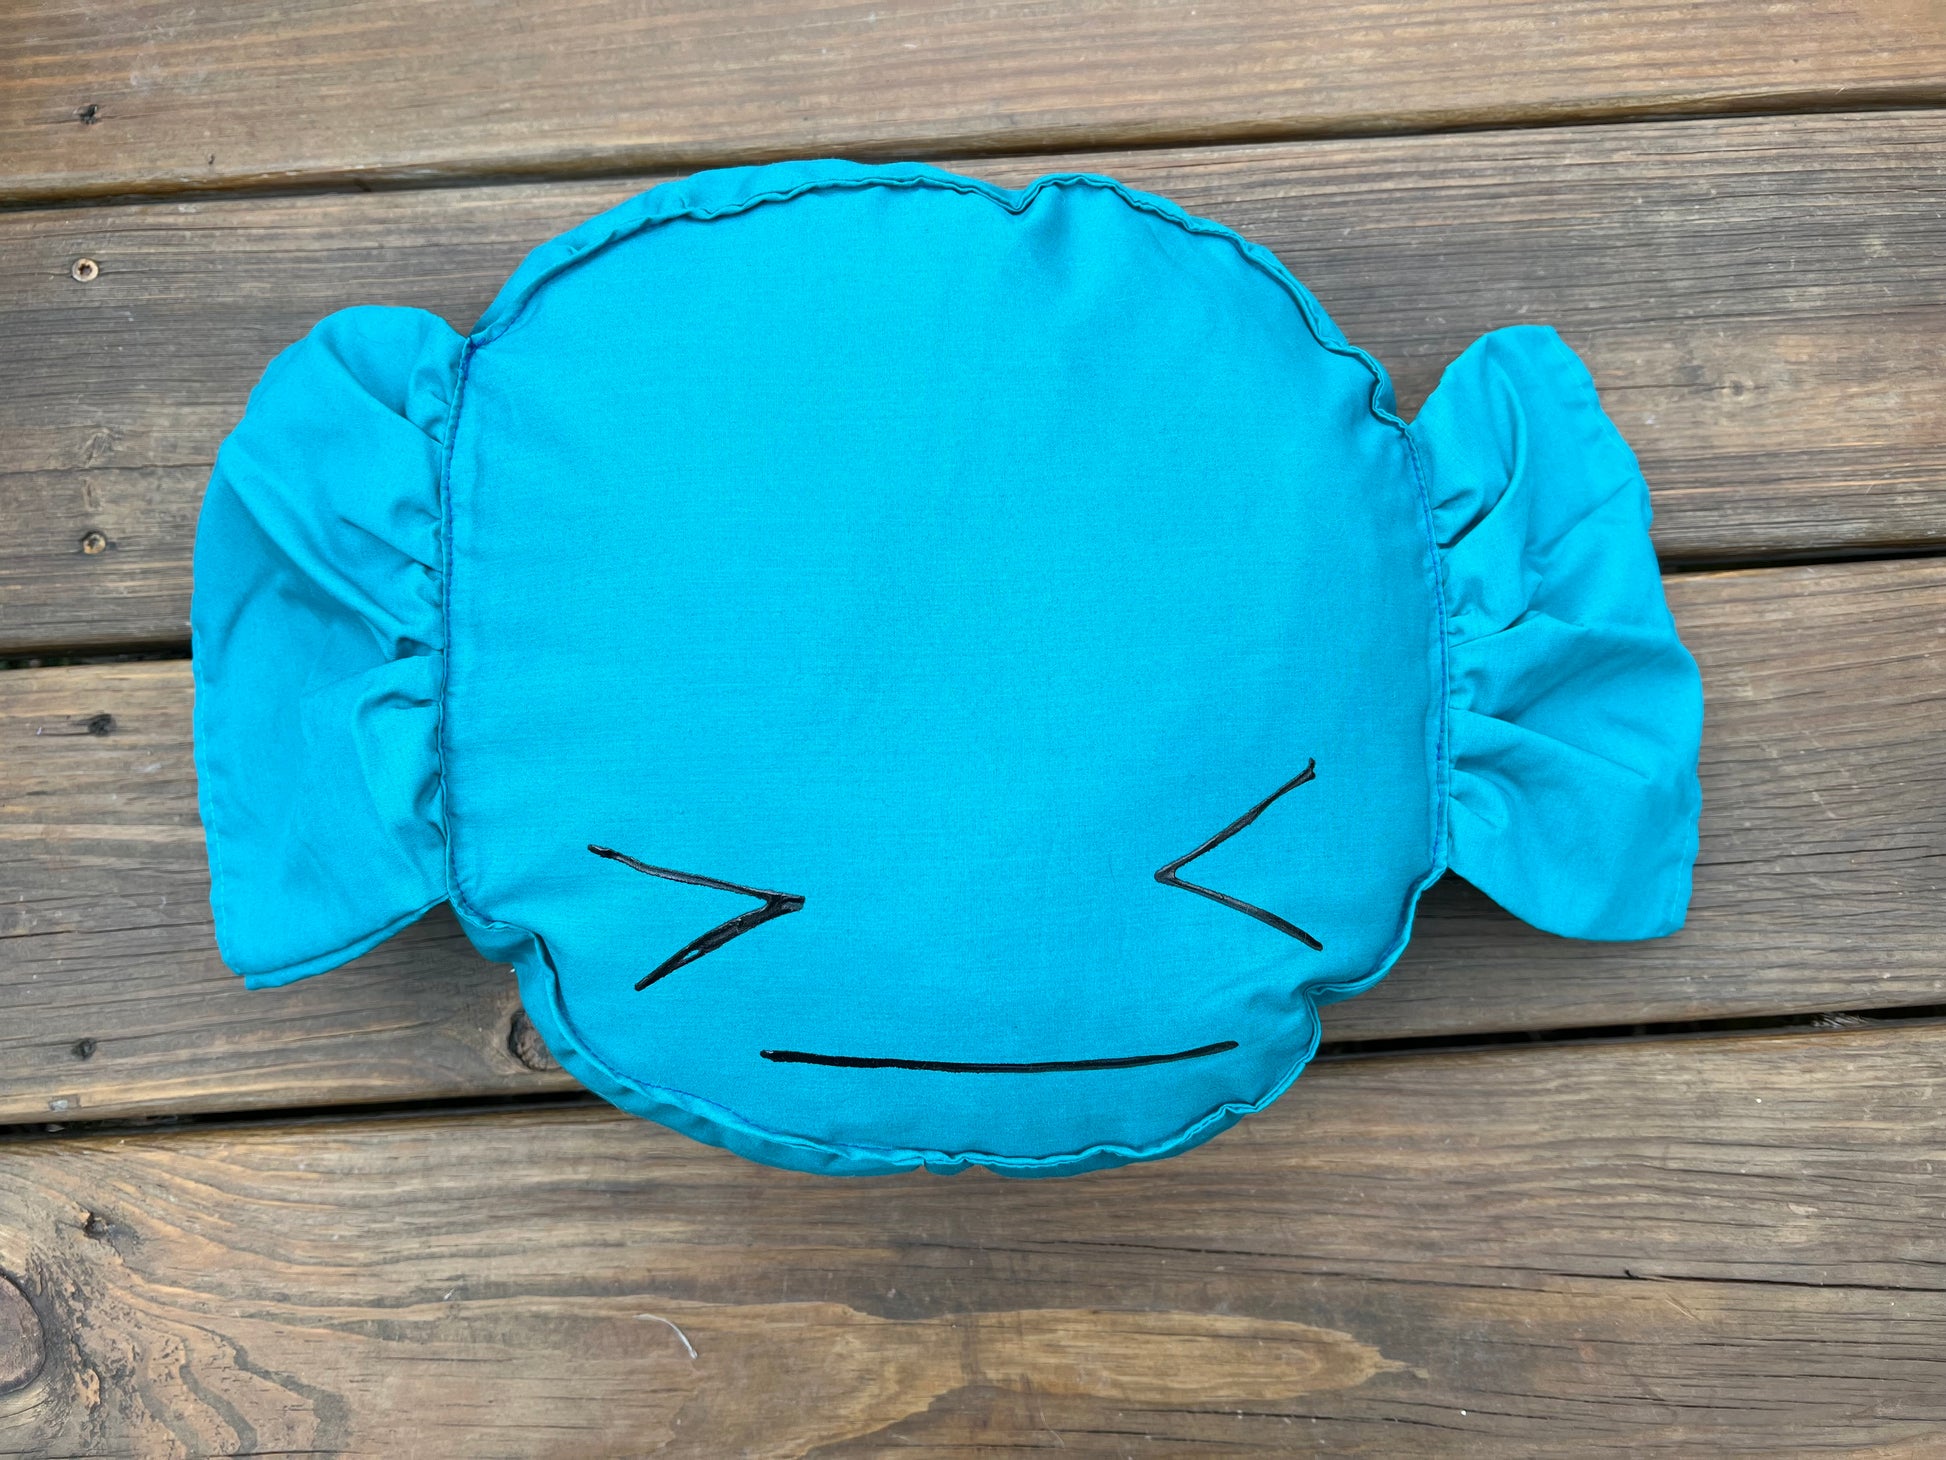 Blue Raspberry candy pillow, against a wood background, with a painted face.